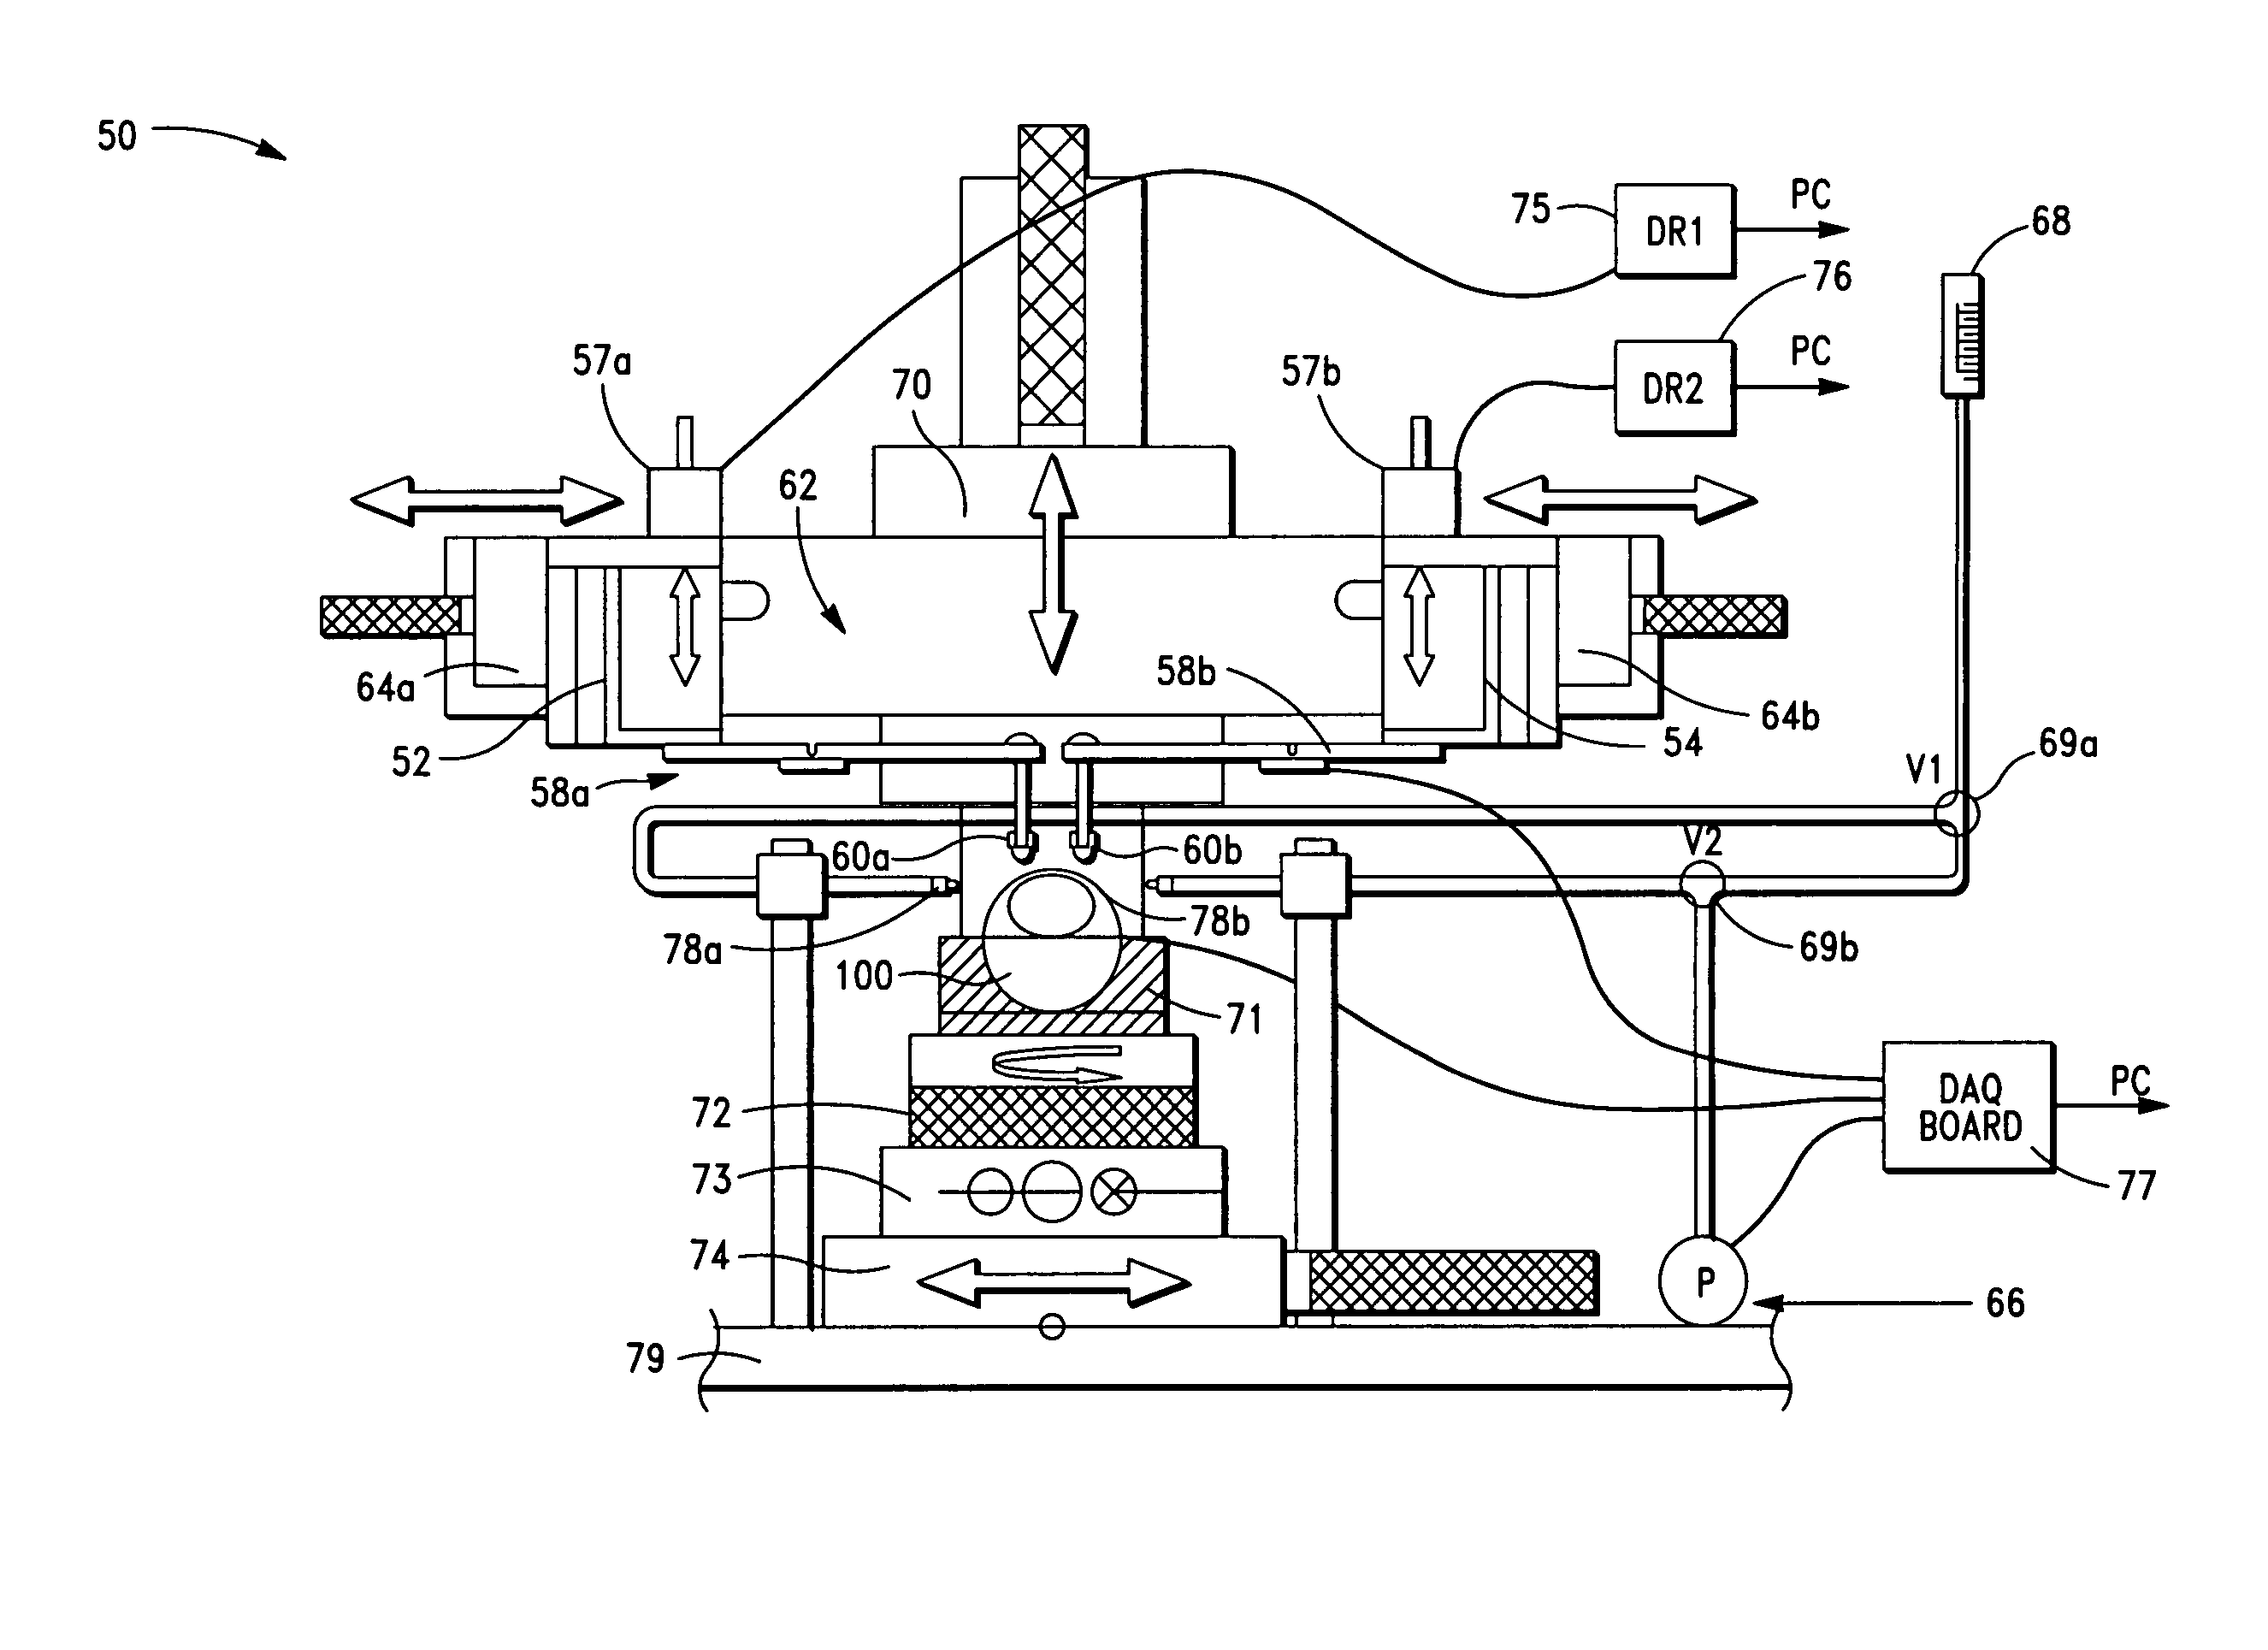 Eye tonometry apparatus, systems and methods